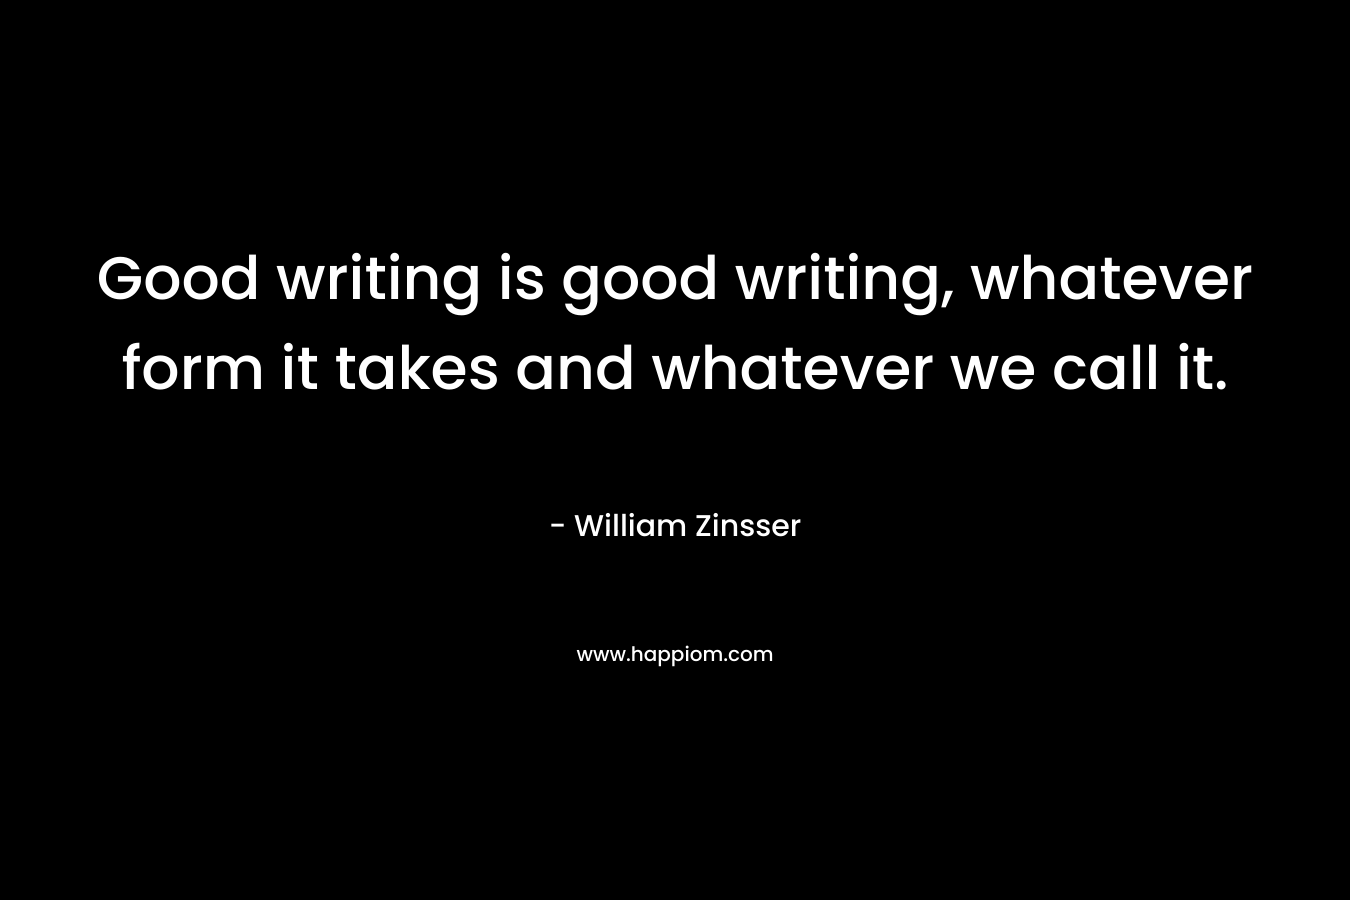 Good writing is good writing, whatever form it takes and whatever we call it. – William Zinsser